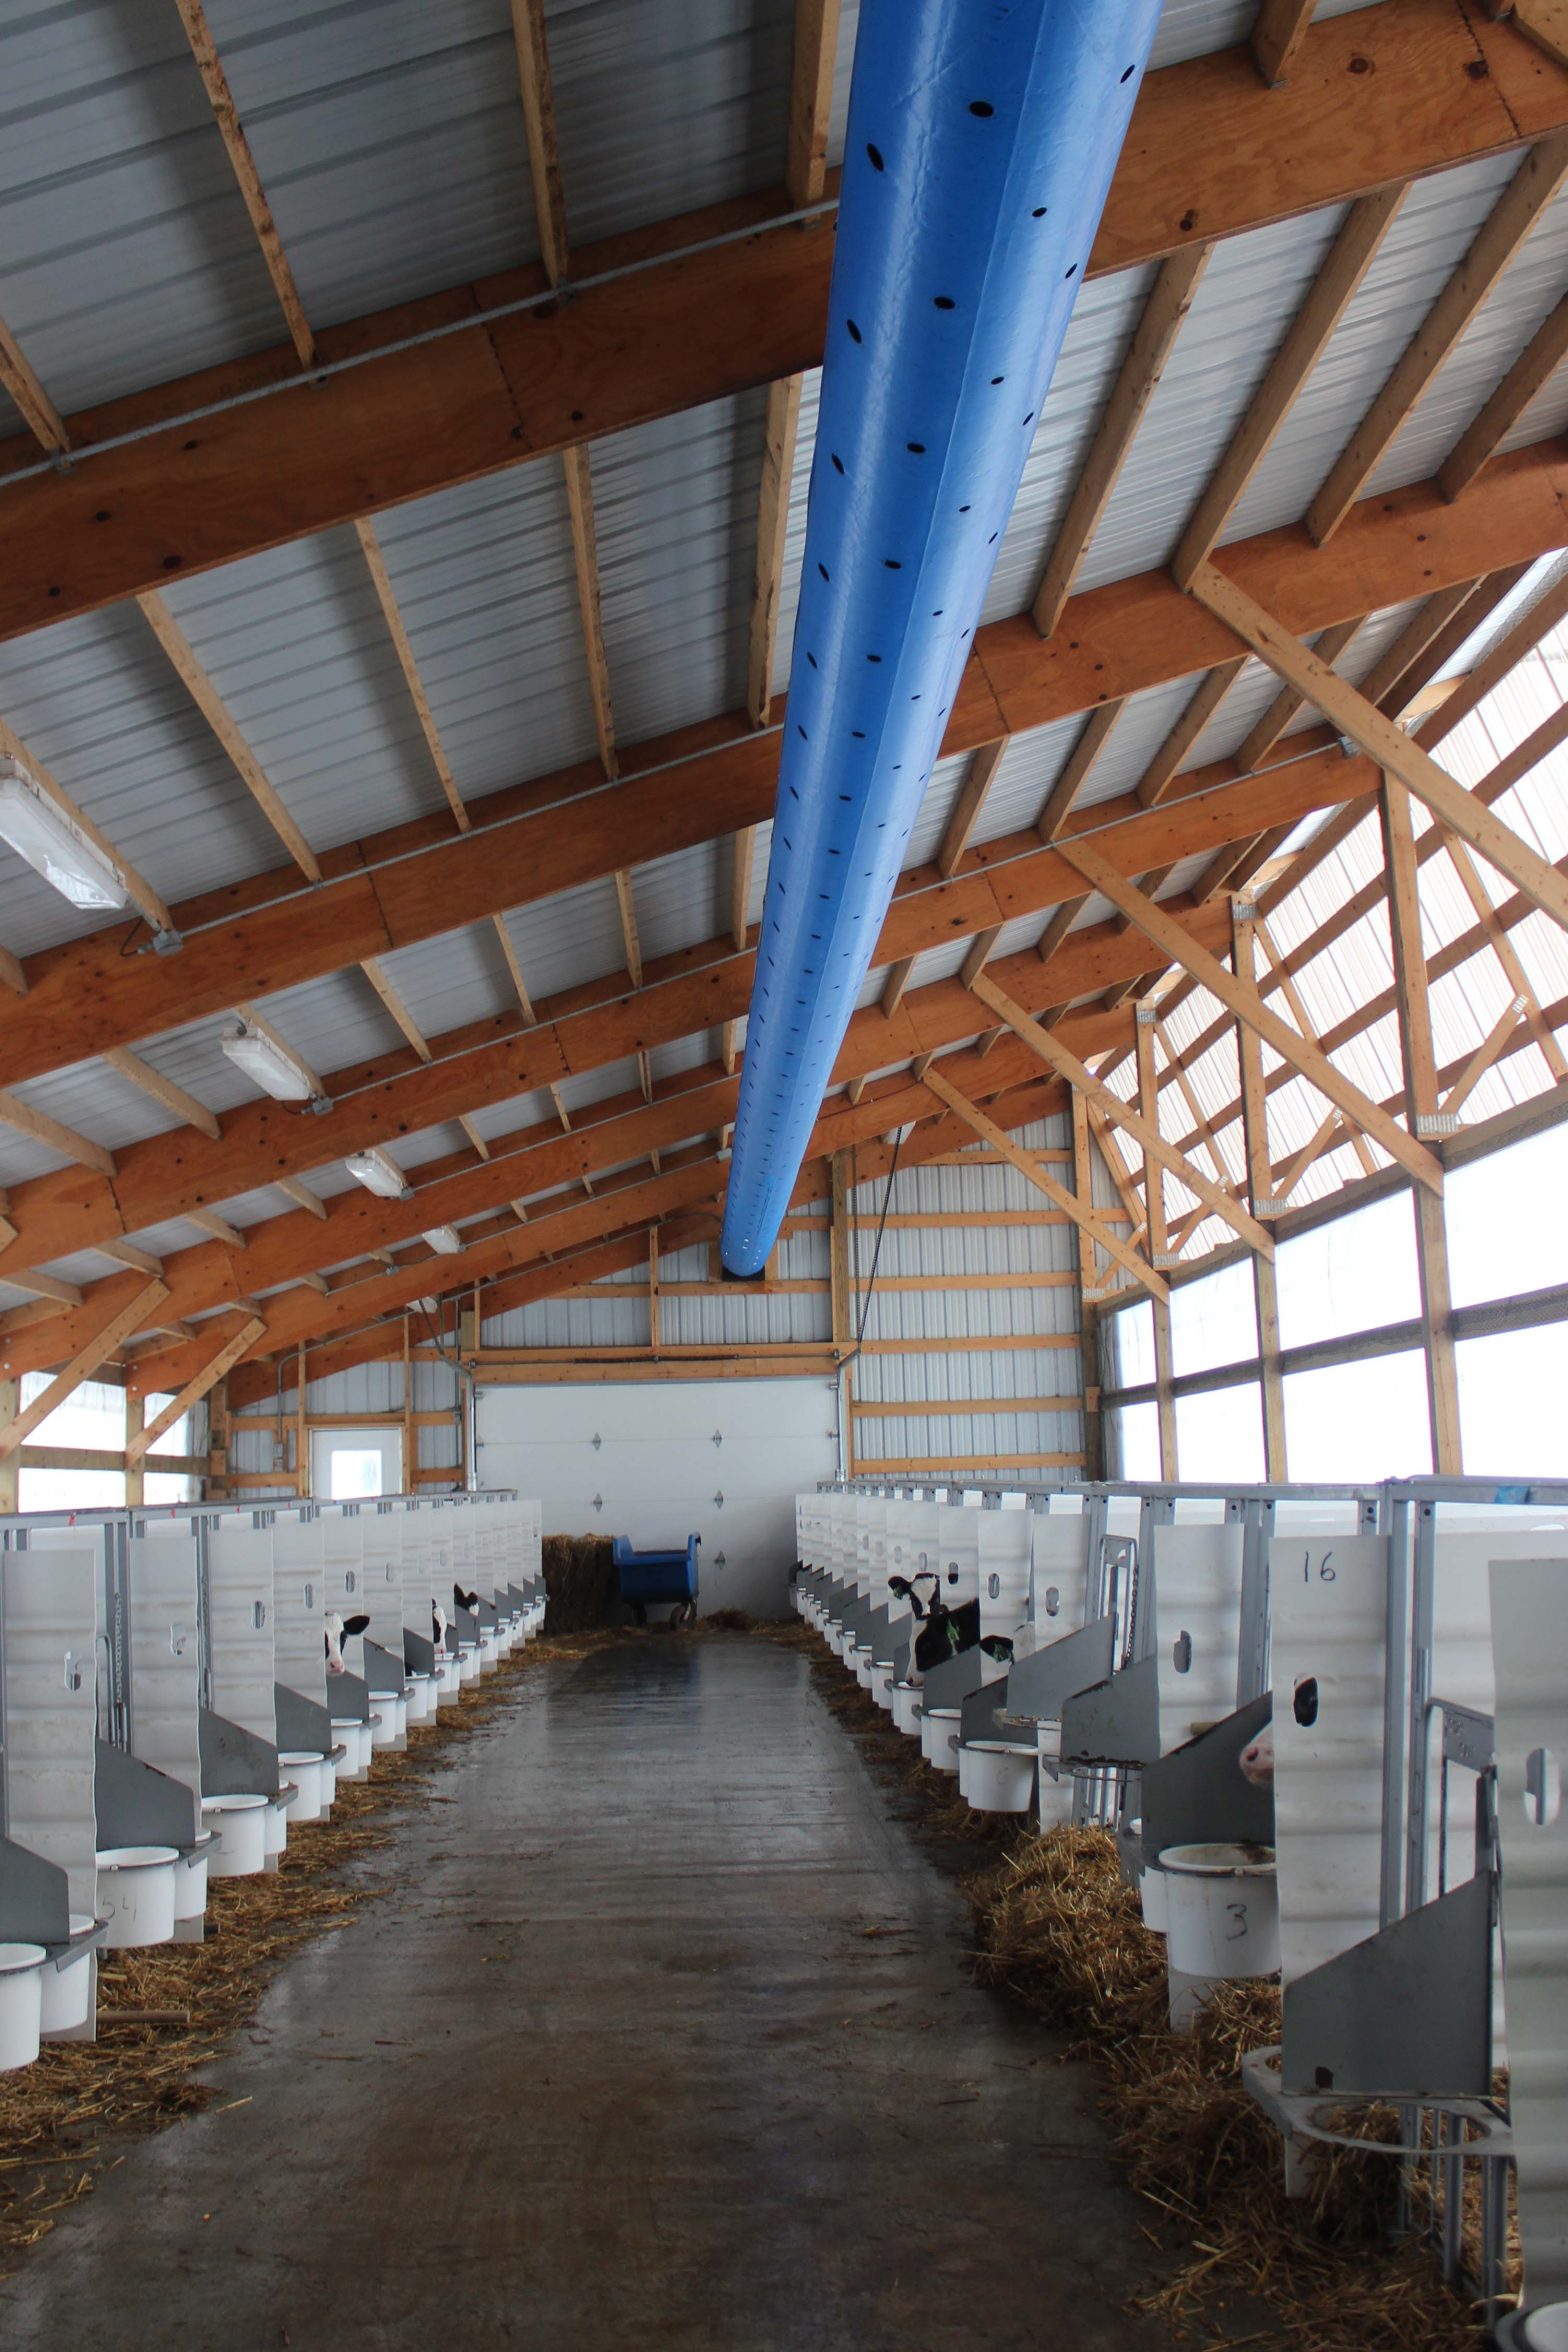 Wittenberg Embryo Transfer in Wausau, Wisconsin added this new calf barn in the fall of 2015.  It features a milk room in the center of the barn with tube ventilation based on Dairyland Initiative designs.